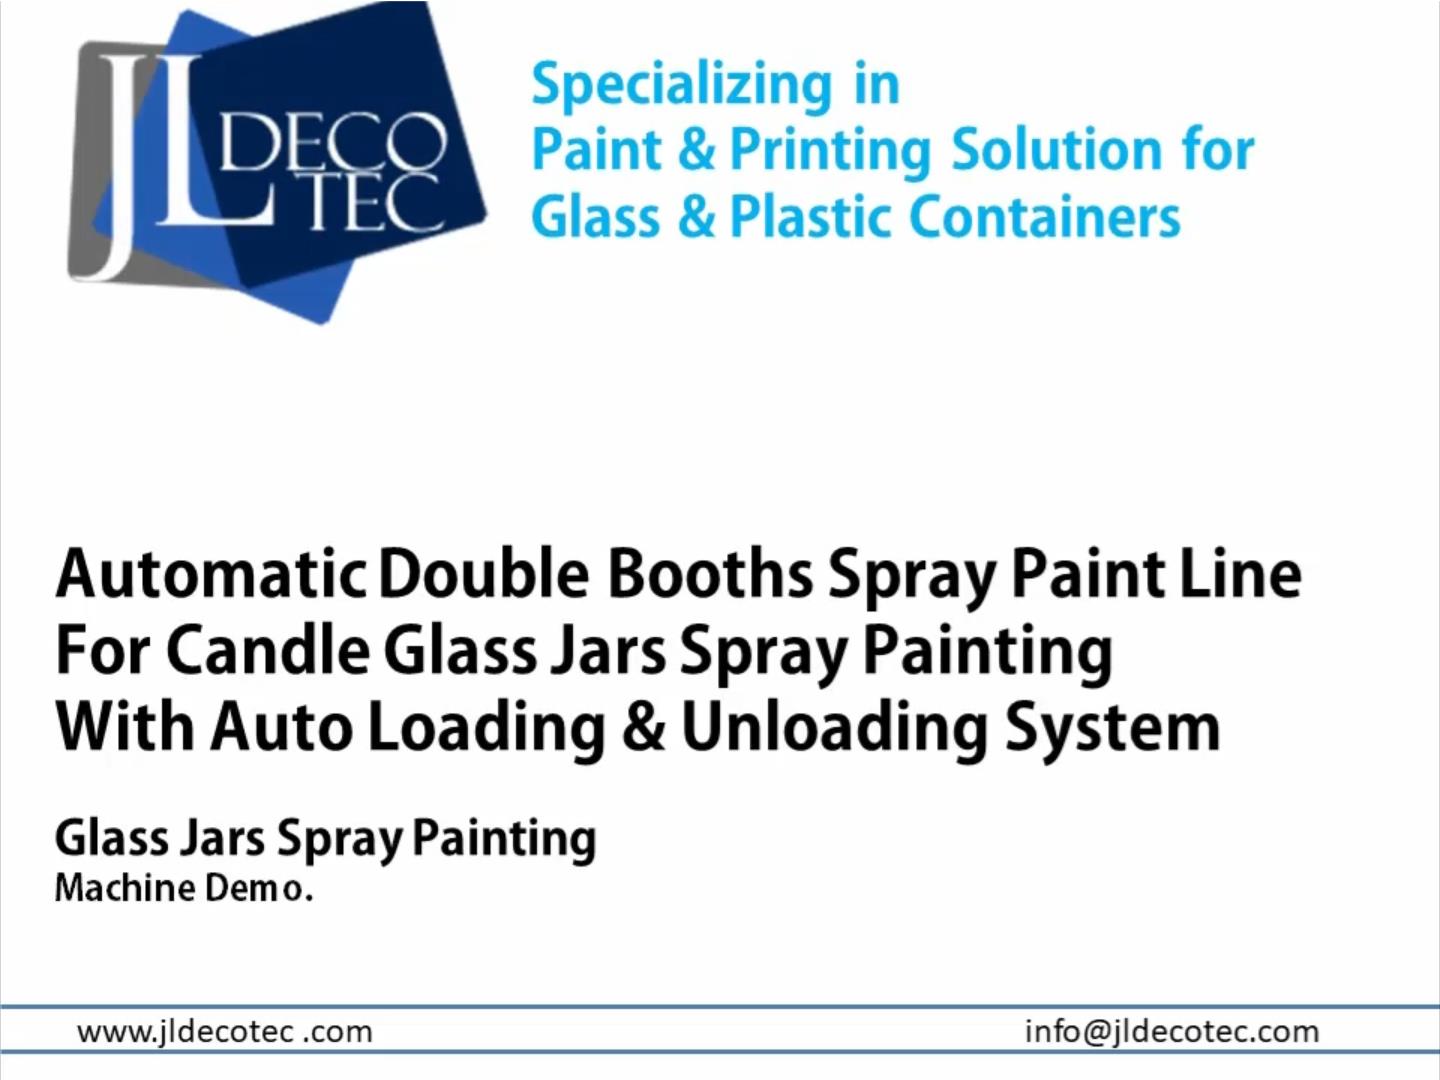 Double Booths Spray Painting Line for Glass Candle Jars